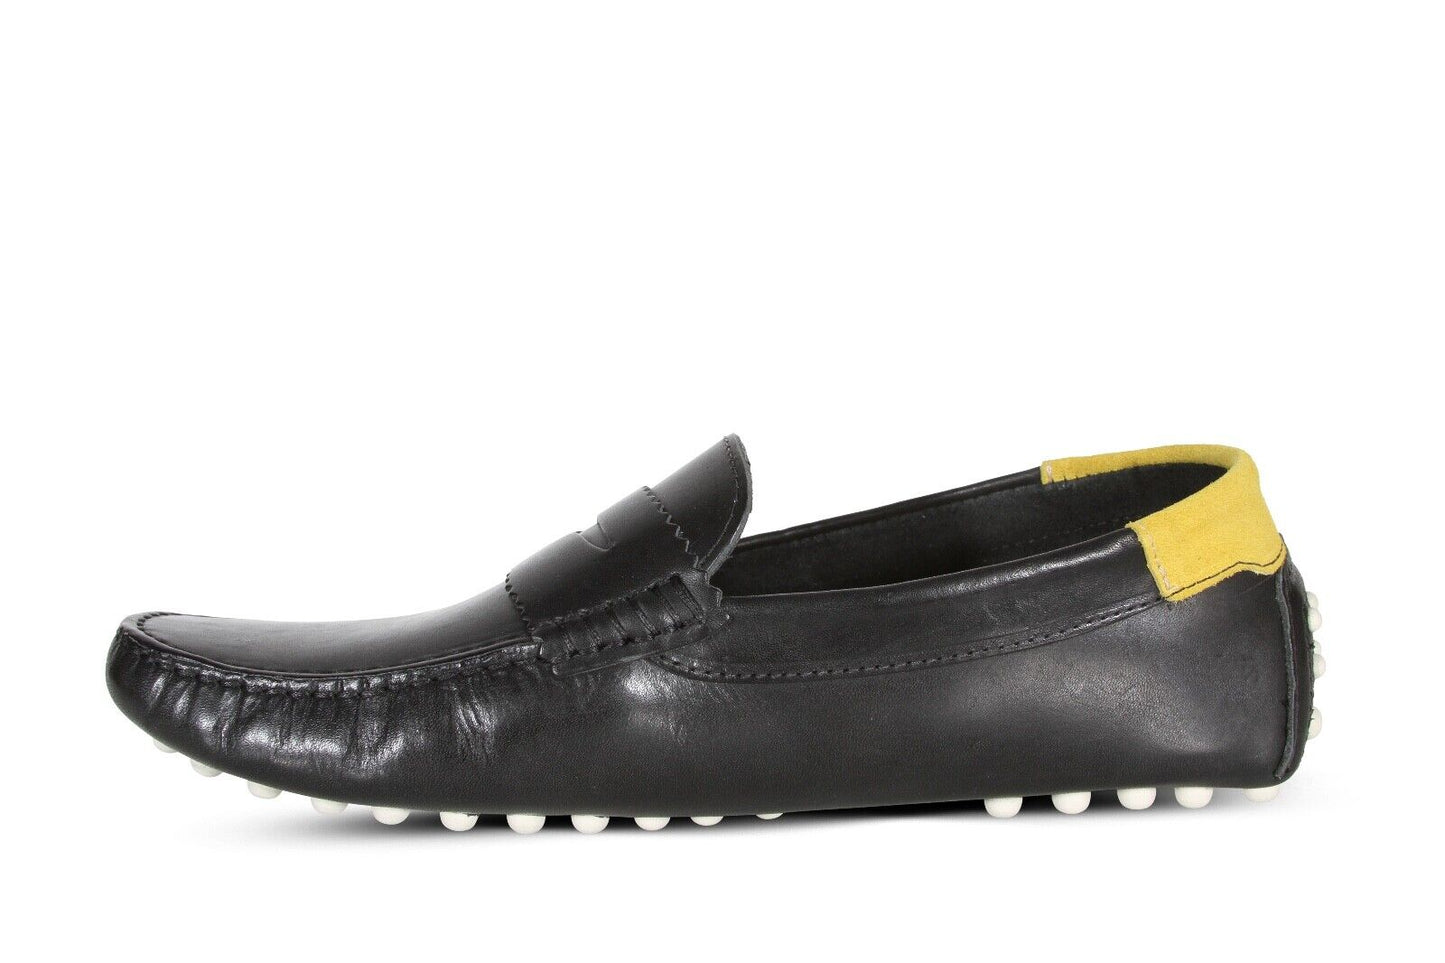 Lacoste Concours 123 1 CMA Men’s Leather Loafers in Black 745CMA0032454